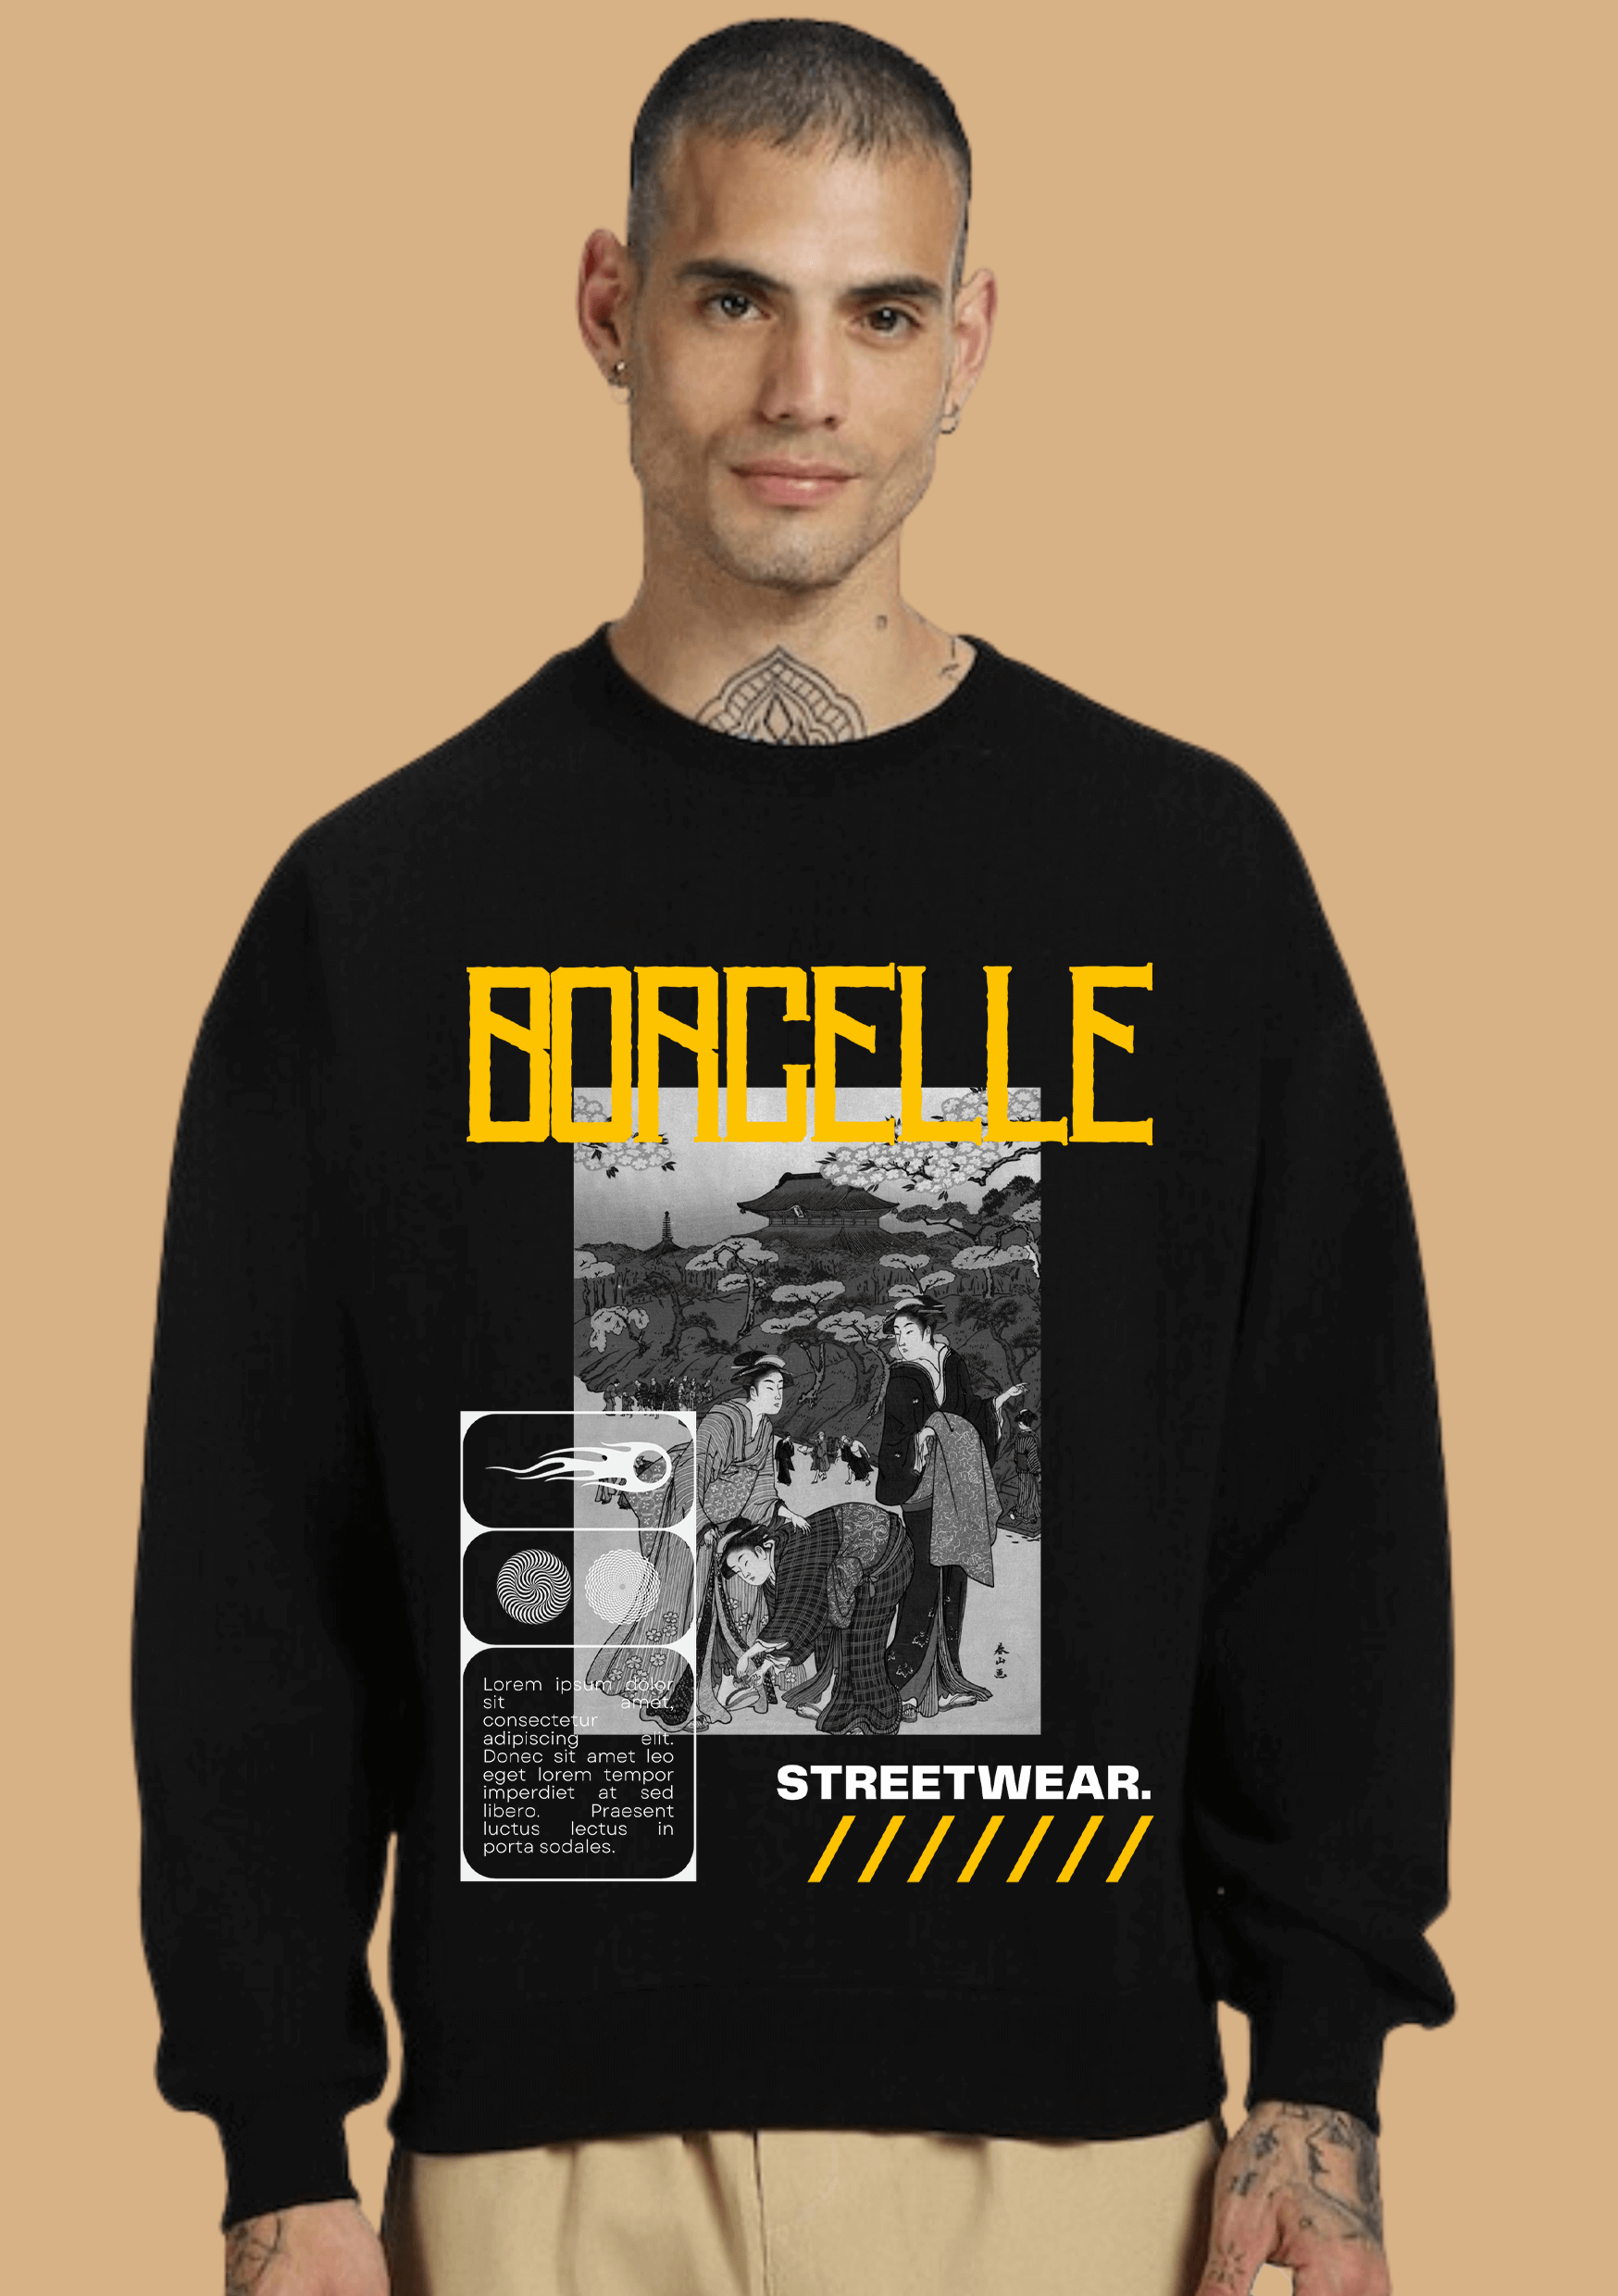 Borcelle printed black color sweatshirt by offmint